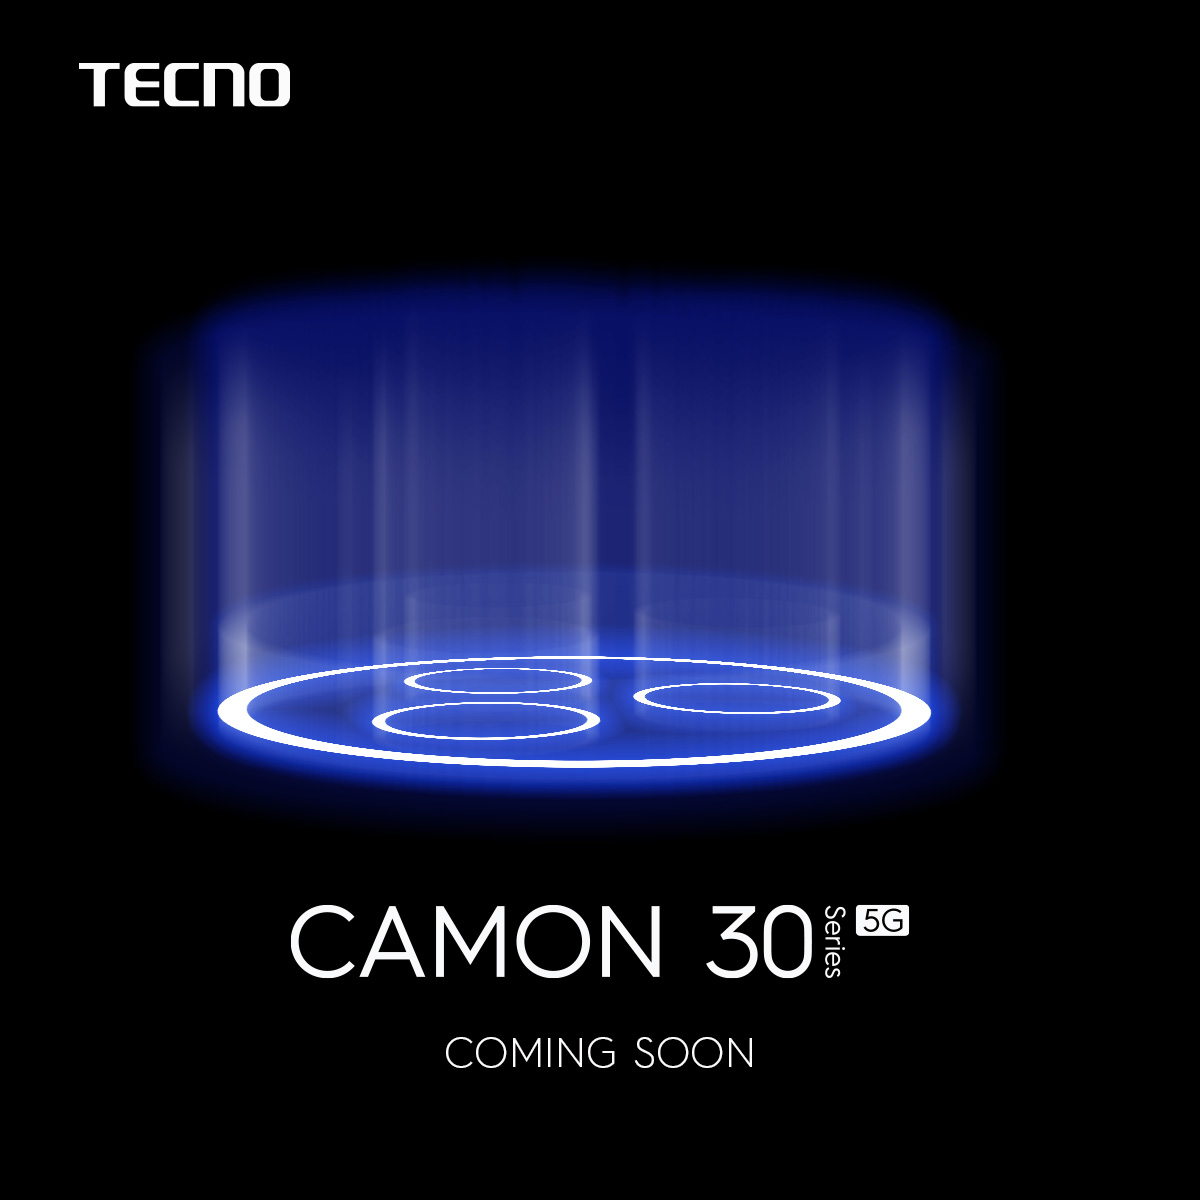 We're ready to make you beam on with CAMON. #CAMON30SERIES #CAMON30AIPhone